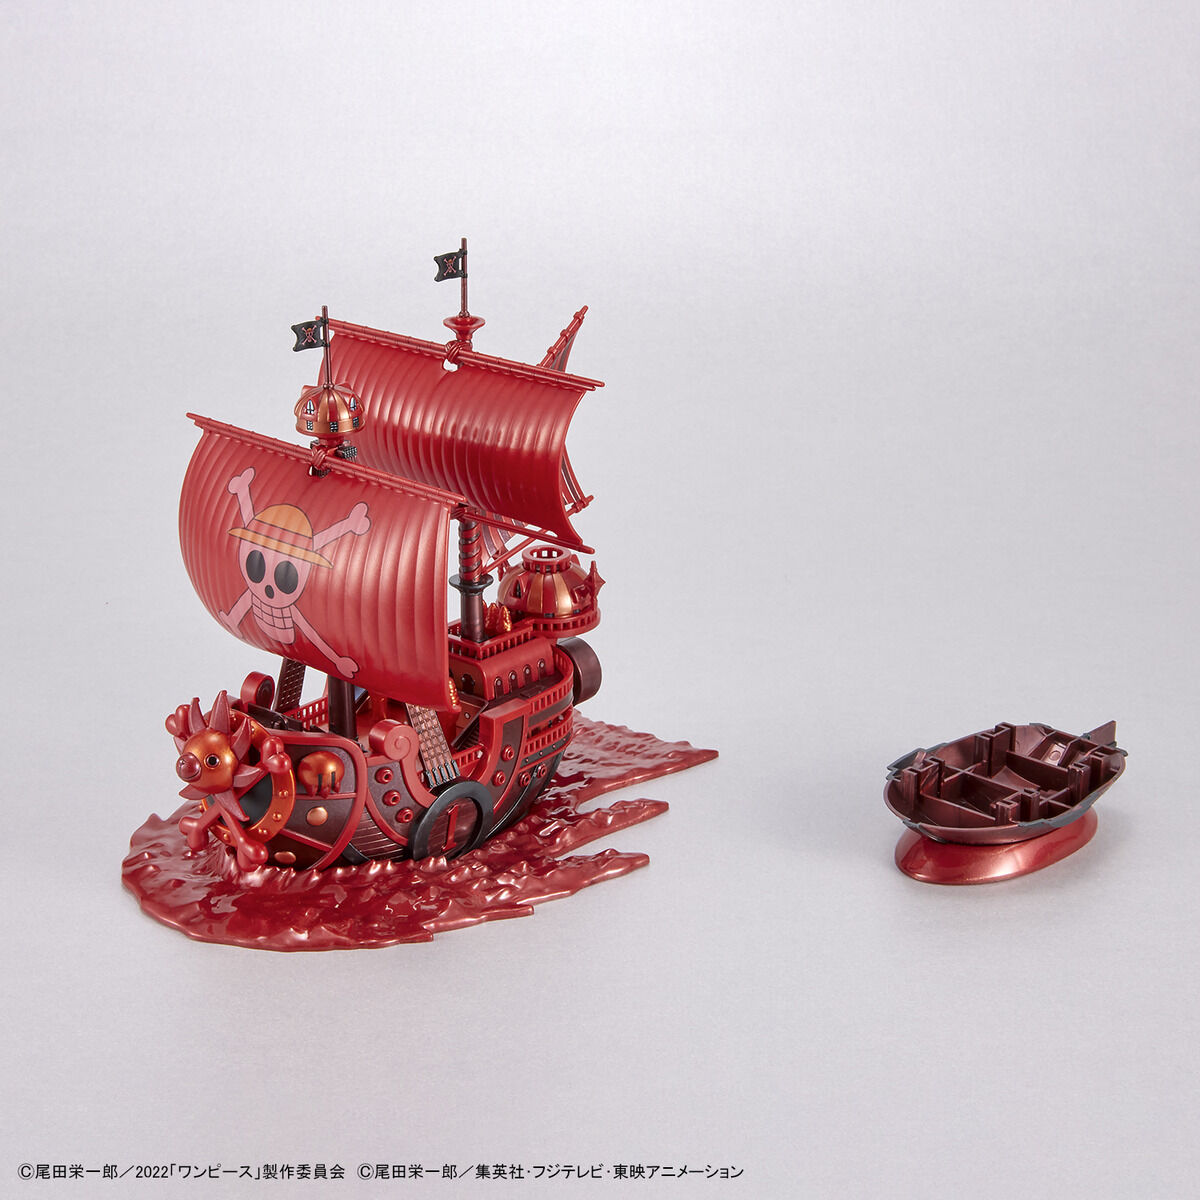 One Piece - Thousand Sunny - RED FILM Special - Grand Ship Collection Model Kit (Bandai), Metallic red color scheme inspired by the film "ONE PIECE FILM RED", includes character plates of the Straw Hat Pirates in movie costumes, display base and sea surface effect included, from Nippon Figures.